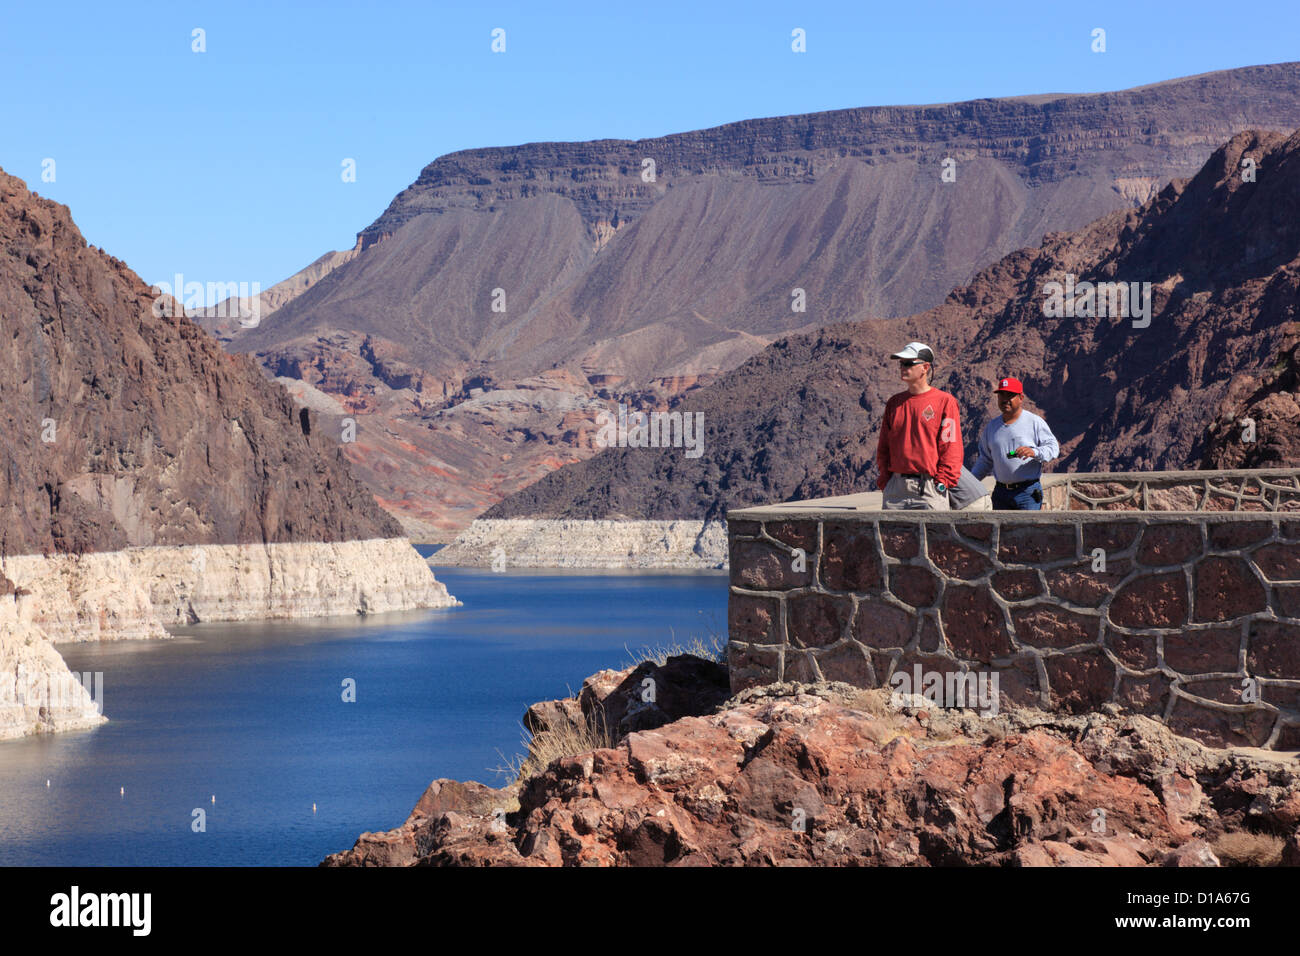 Overlooking Lake Mead in Nevada, USA. Stock Photo